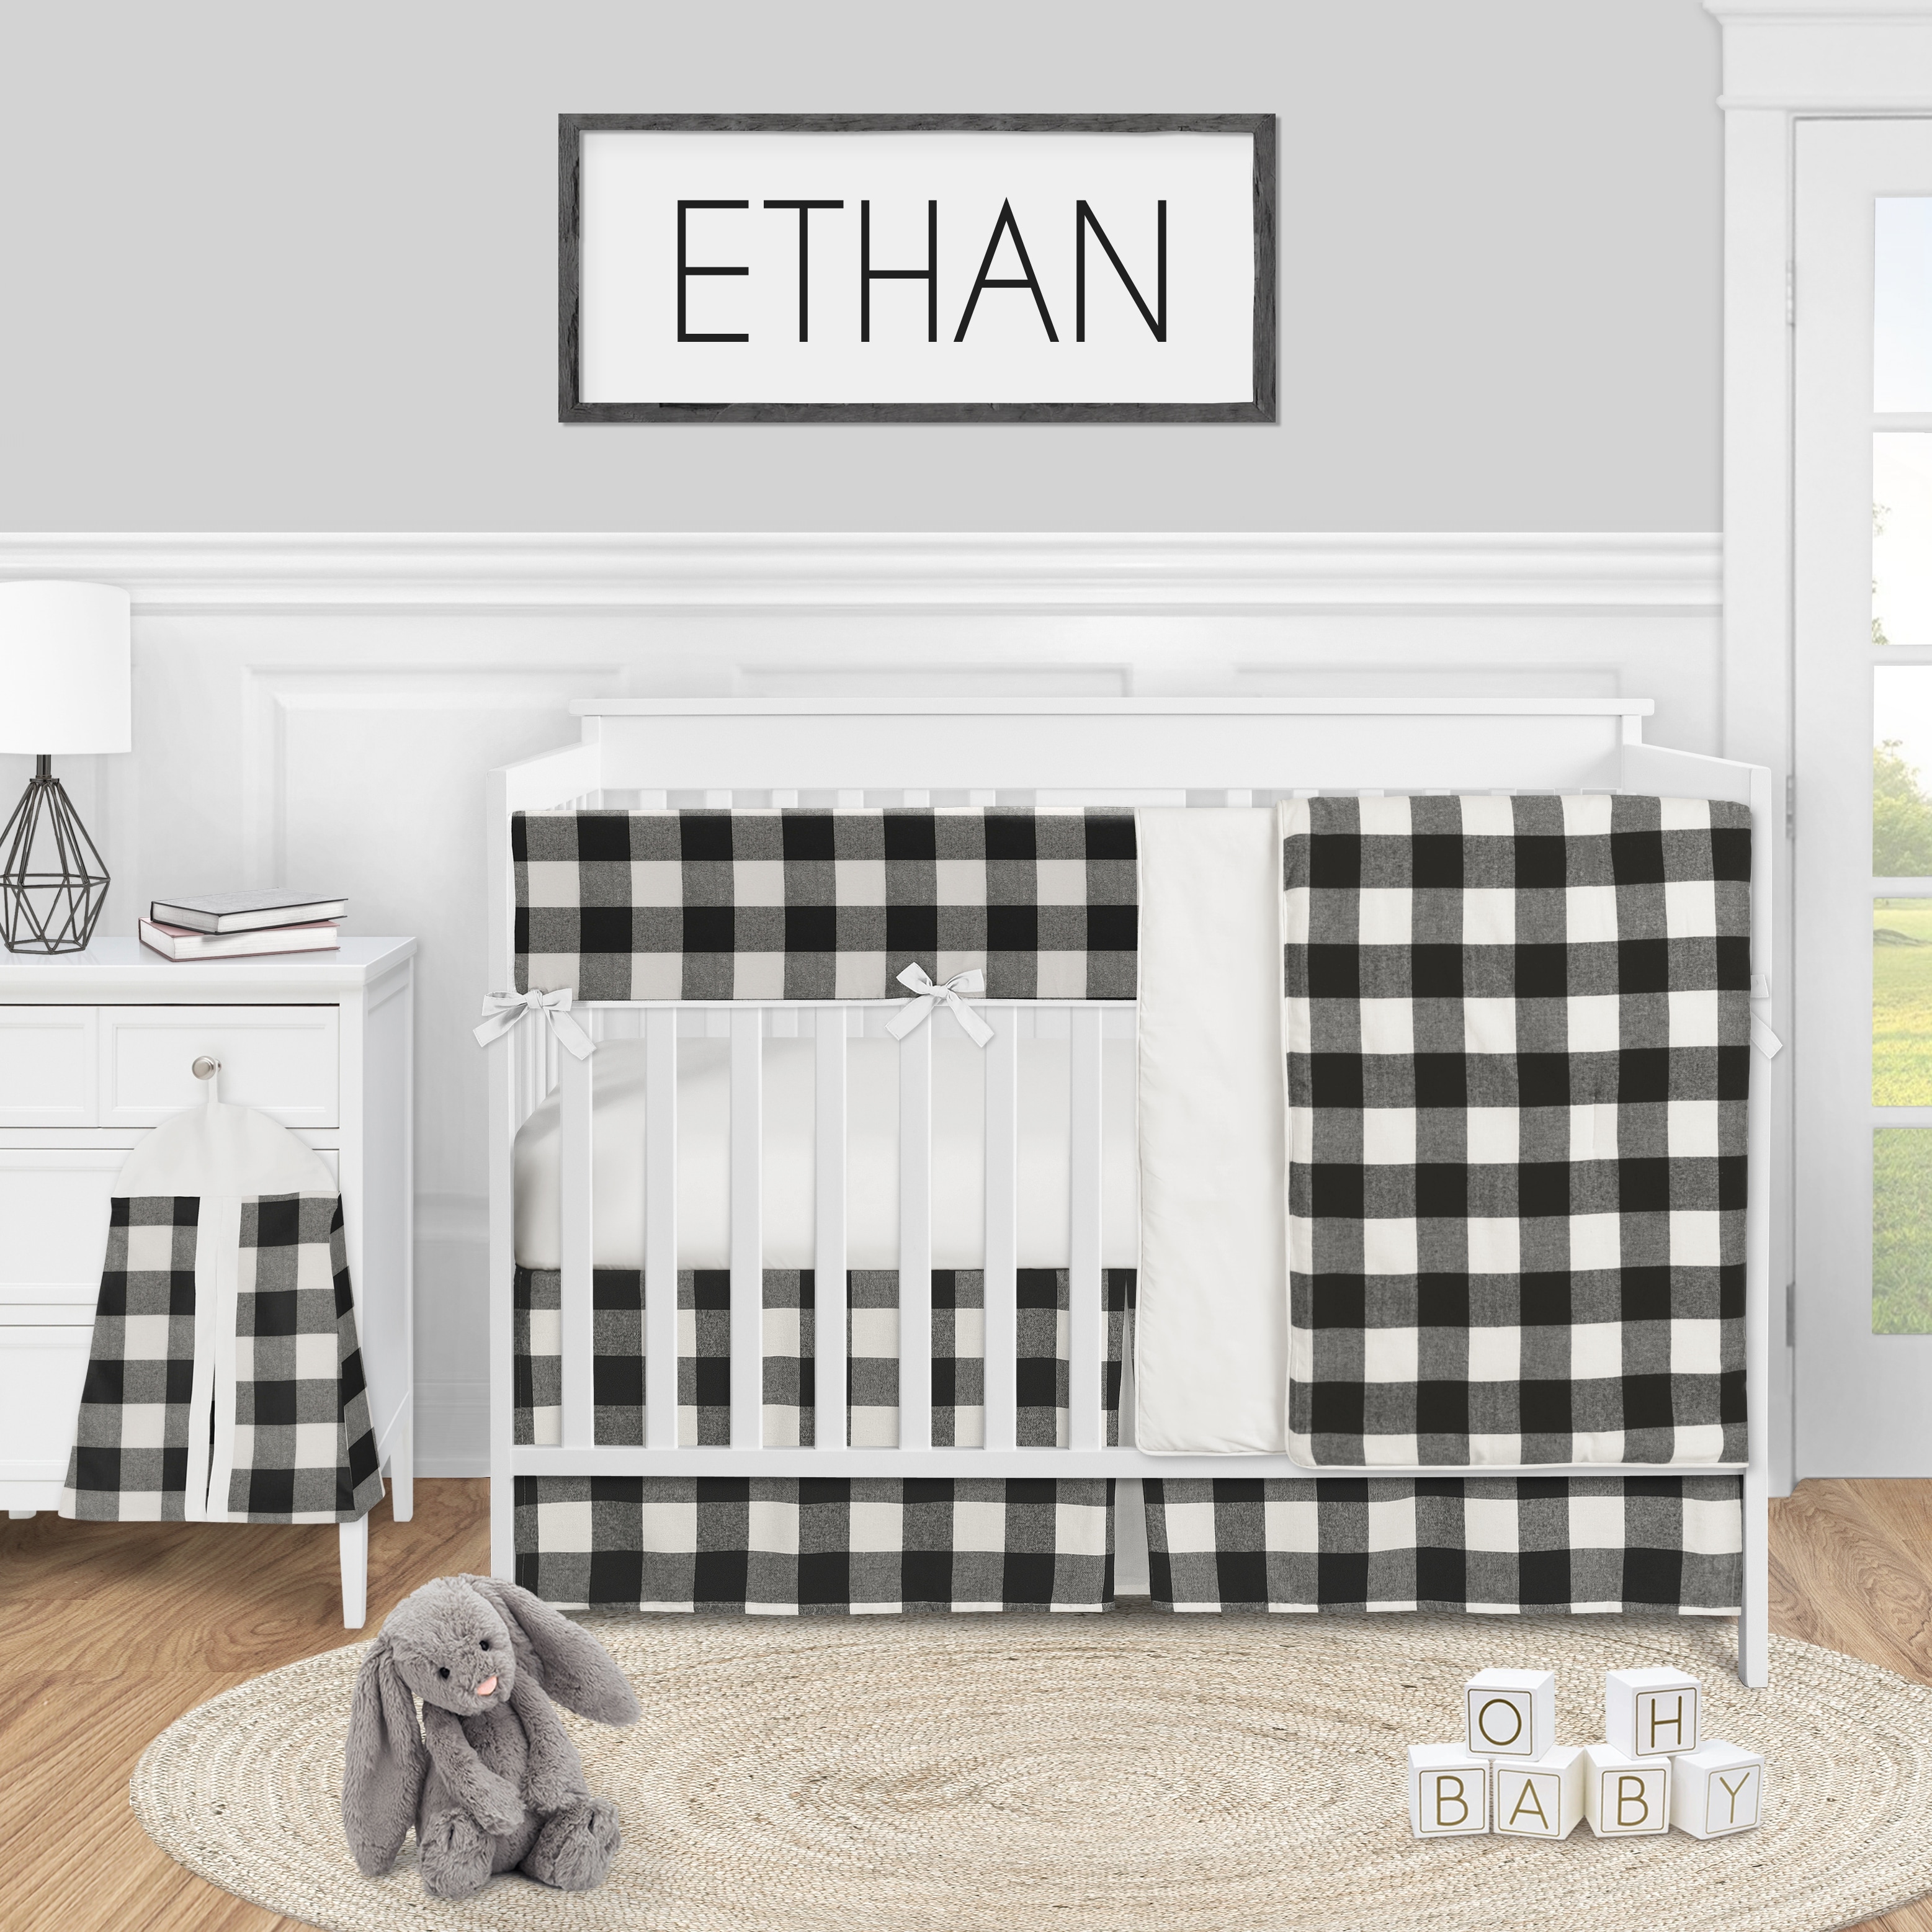 Buffalo Plaid Check Collection Boy Or Girl 5pc Nursery Crib Bedding Set Black White Rustic Woodland Flannel Country Lumberjack Overstock 31290427